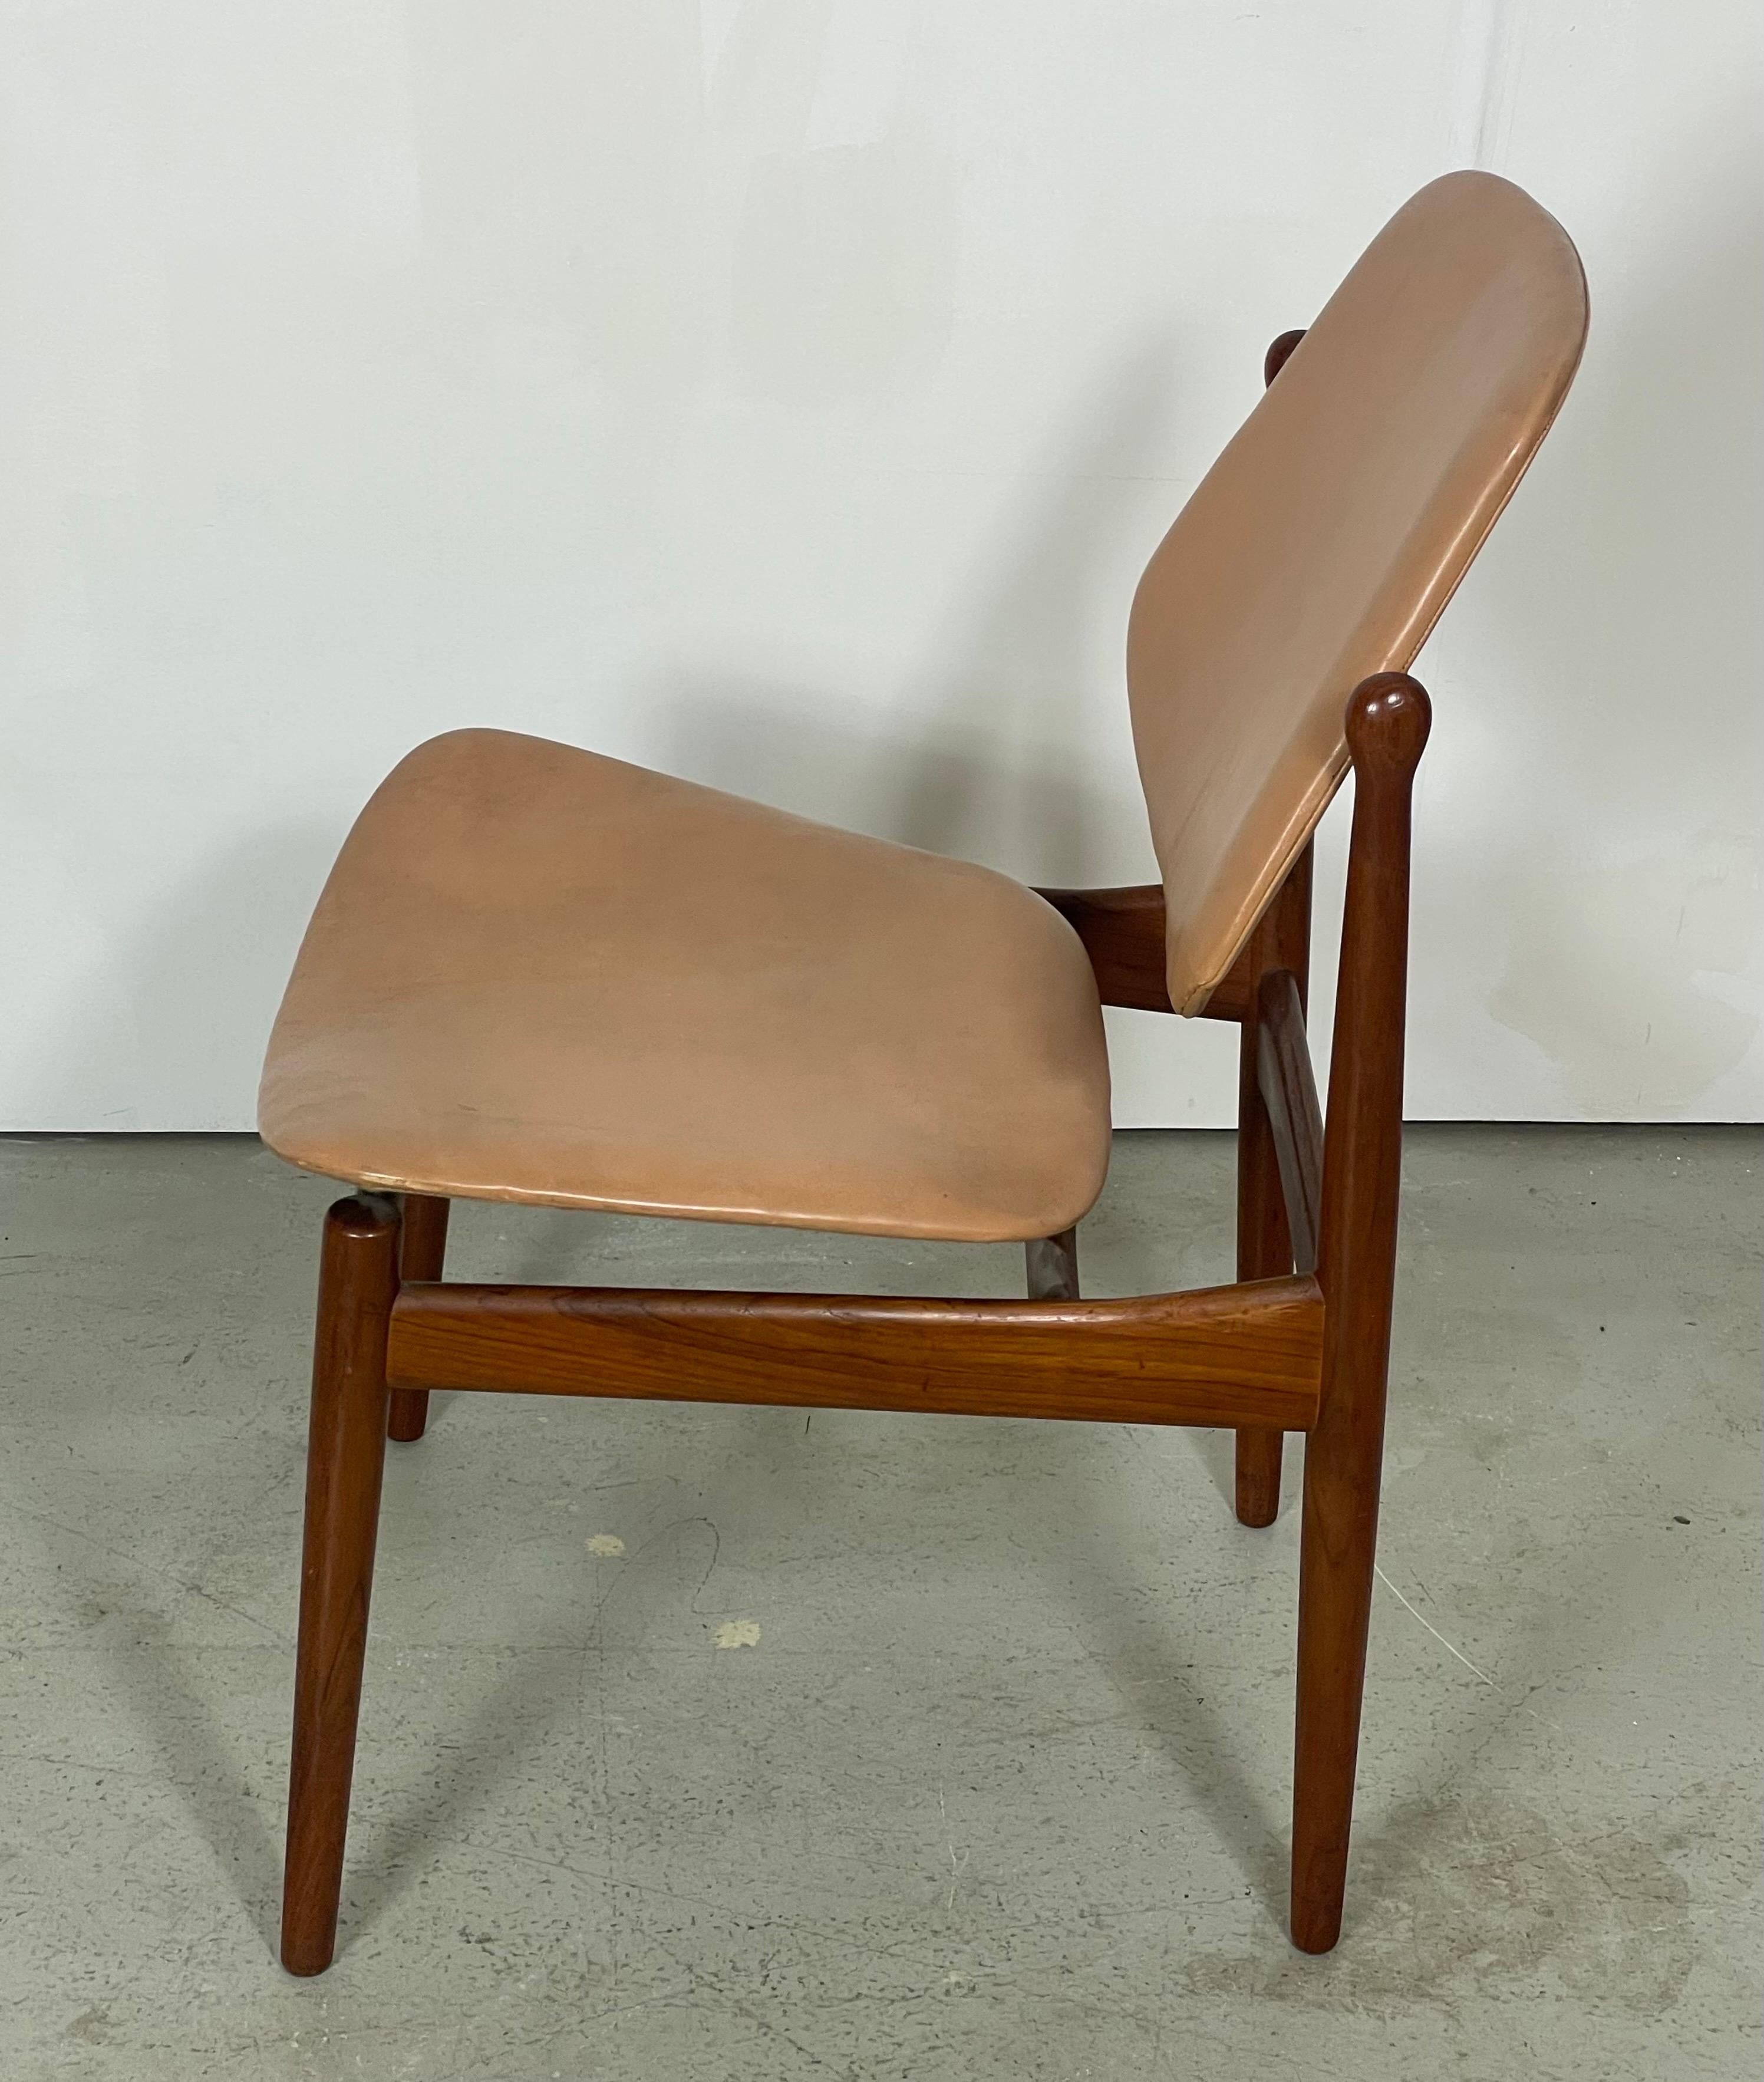 20th Century Danish Teak Dining Chairs by Arne Vodder, 1950s  For Sale